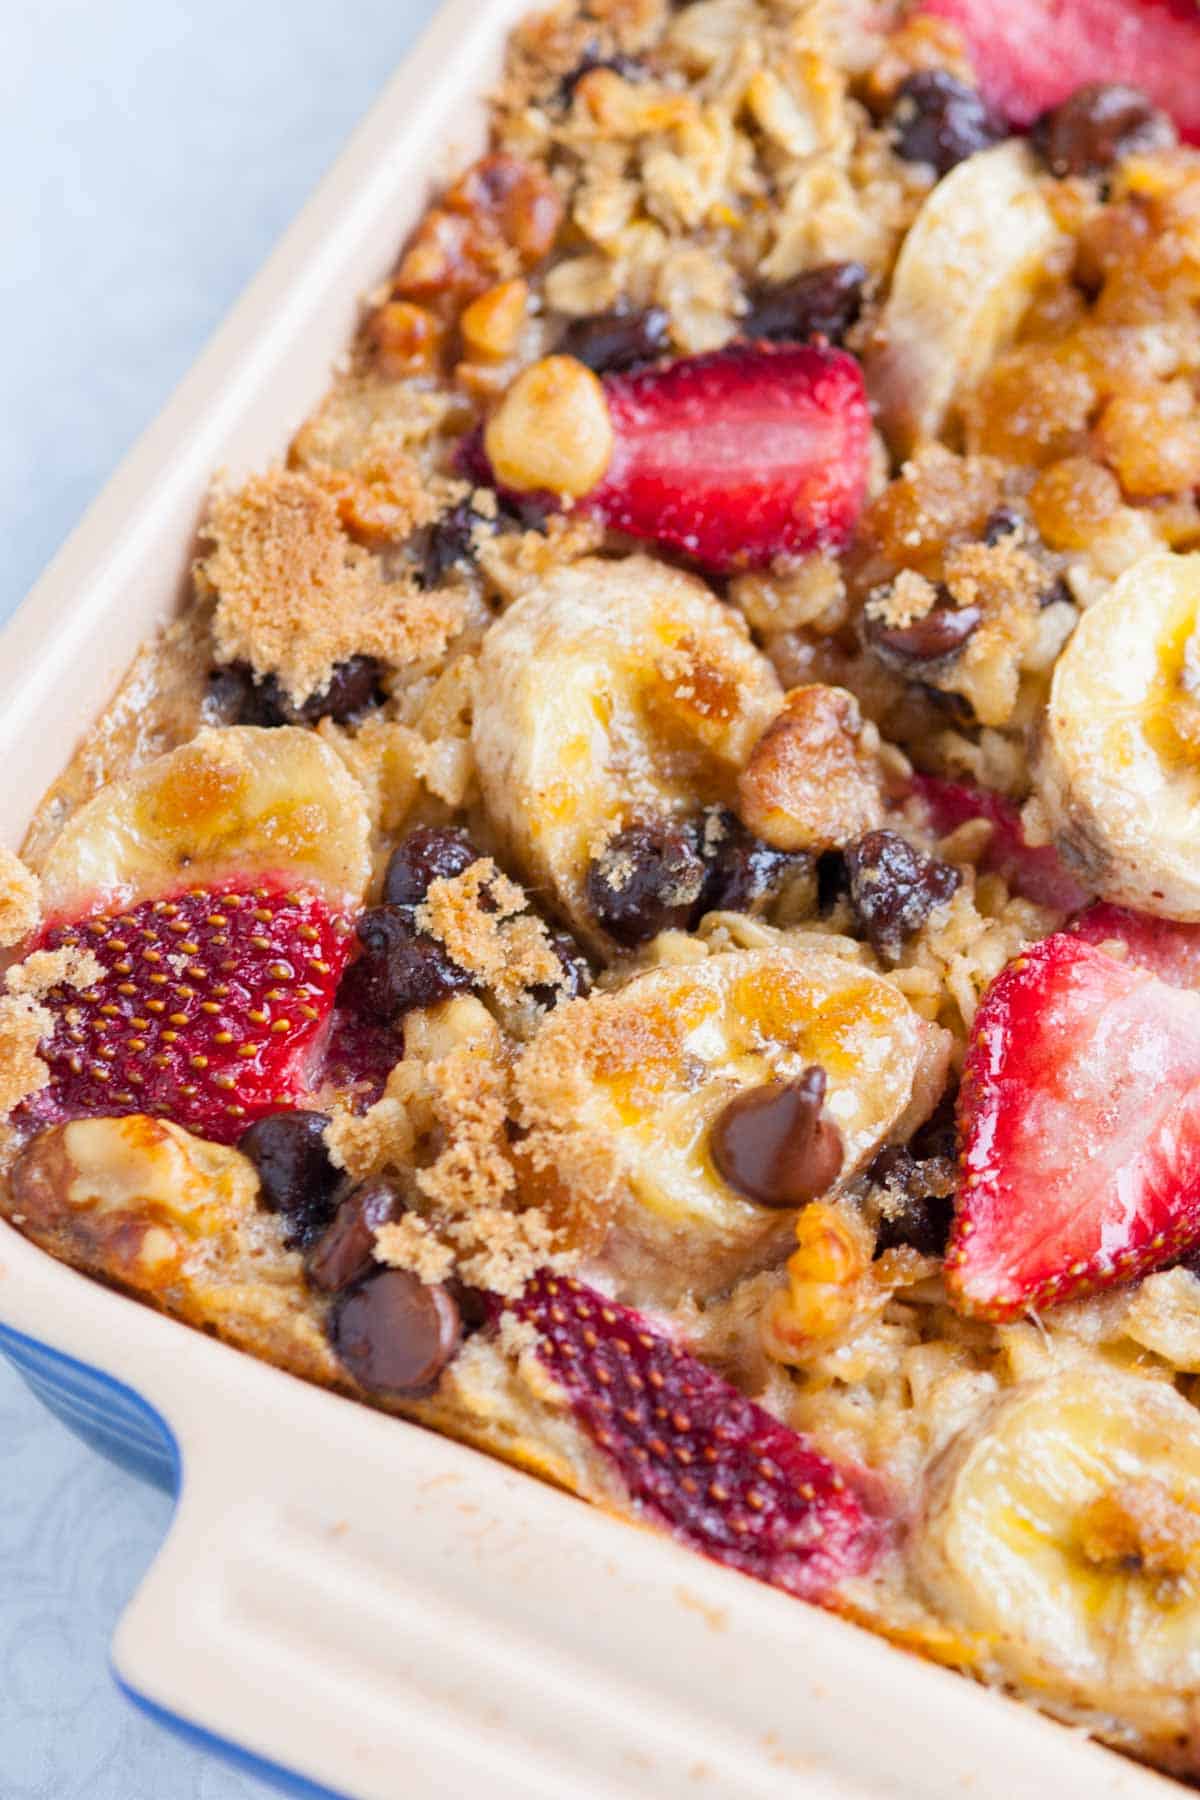 Baked oatmeal with strawberries, banana and chocolate